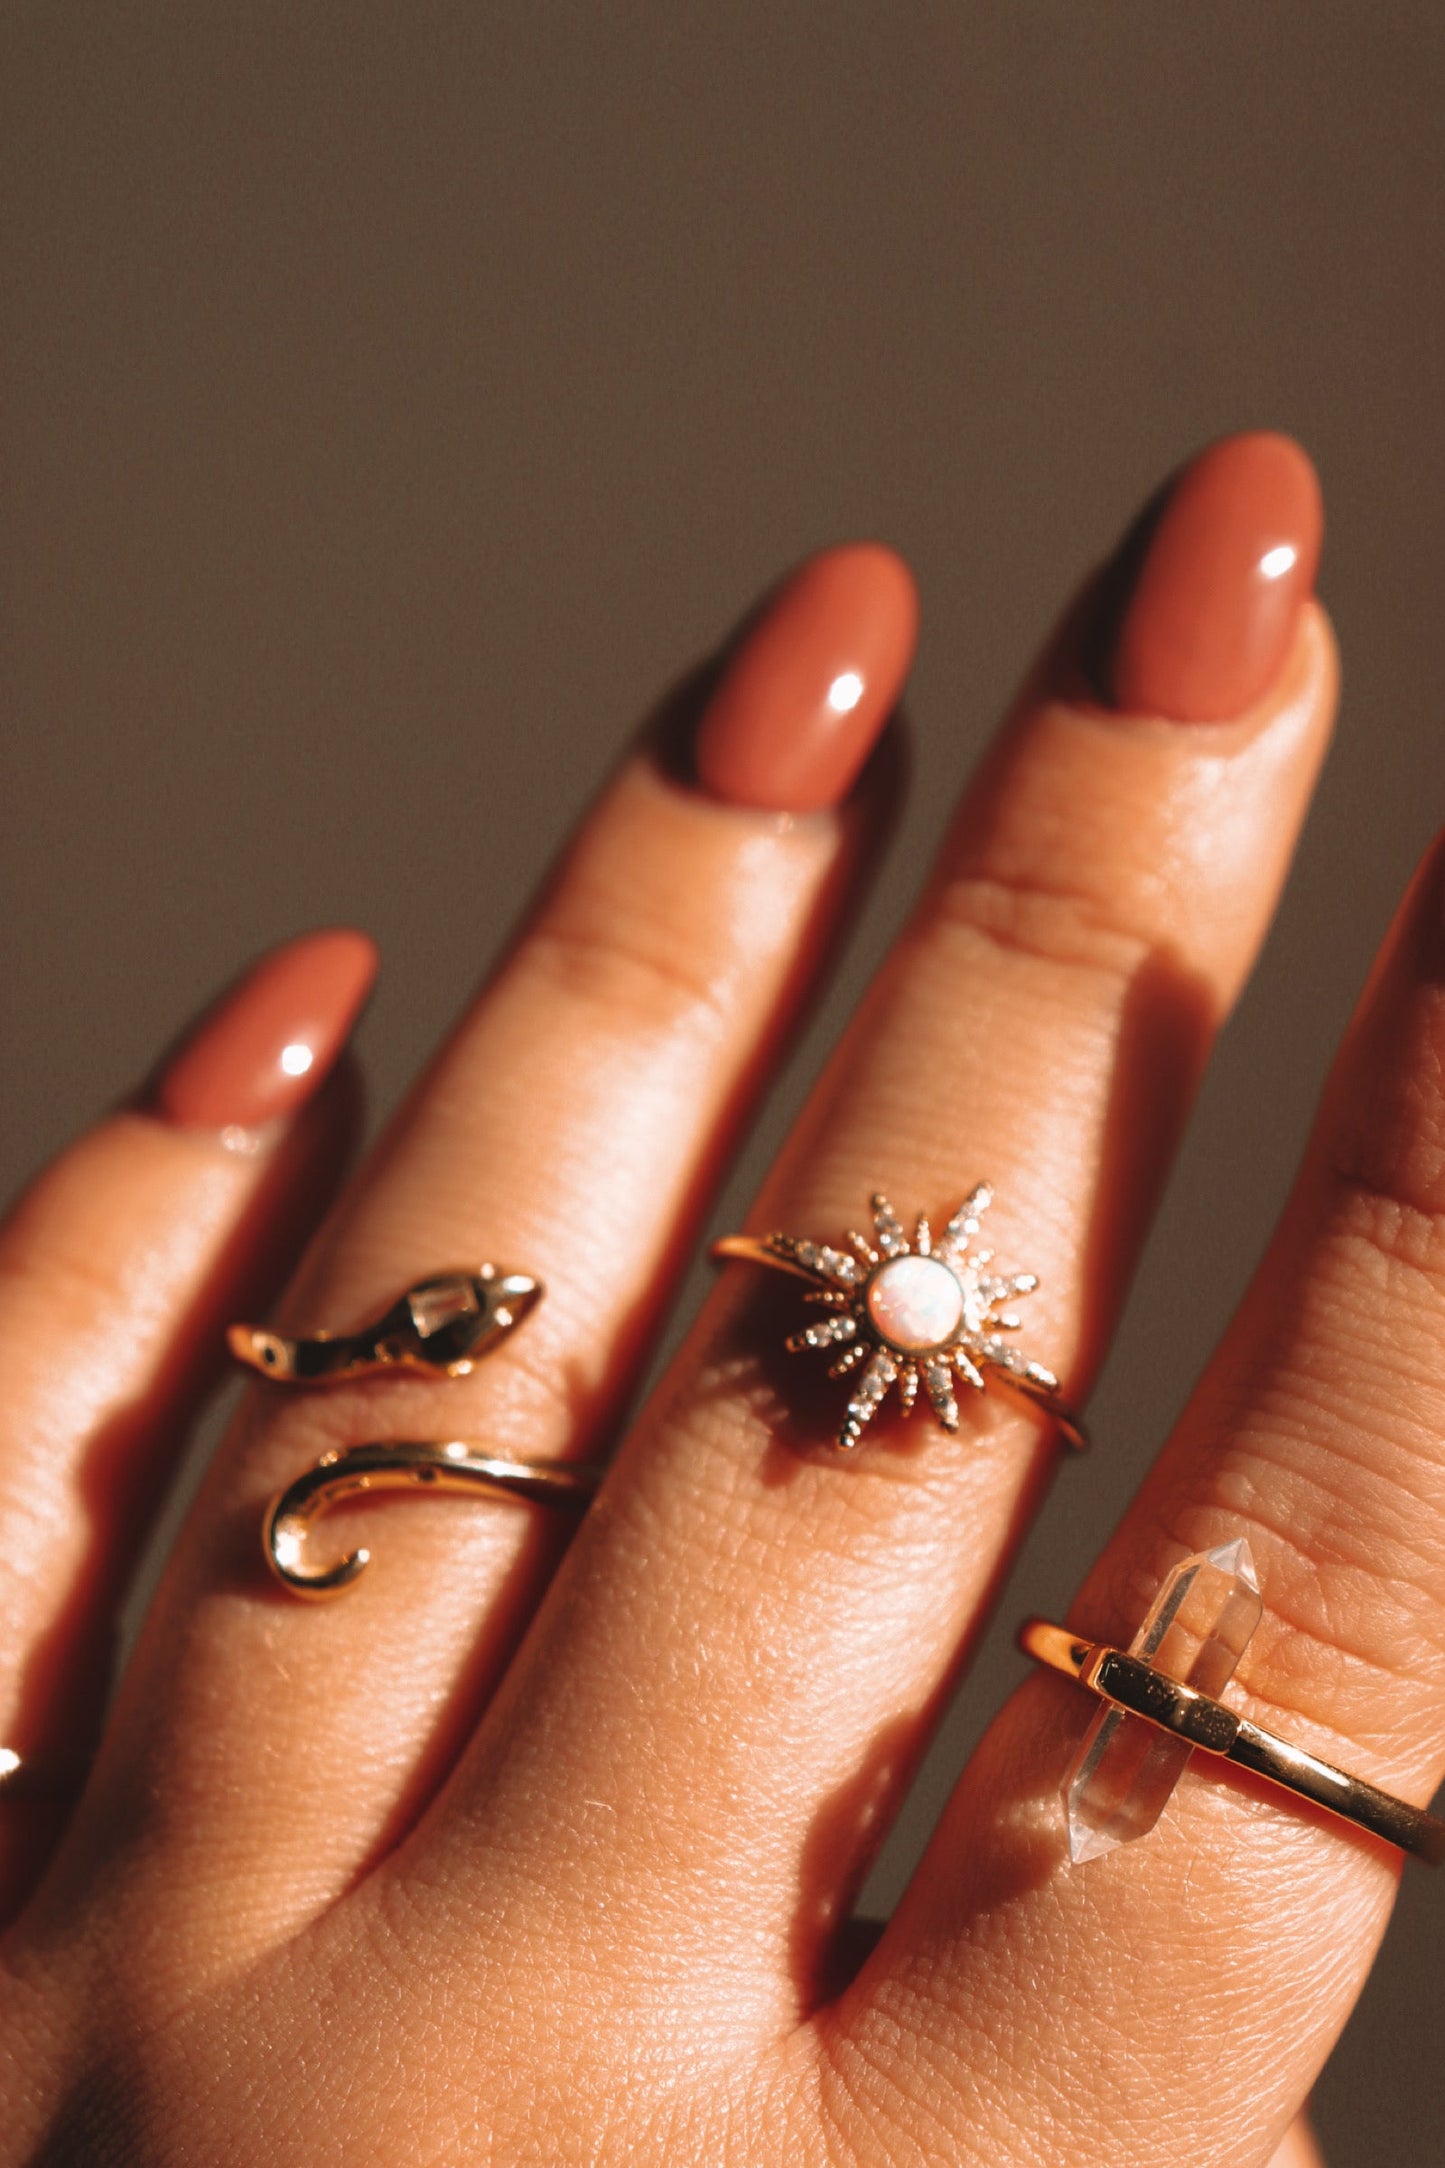 Gold rings on fingers with oval nails painted brown. Rings include a snake design, a starburst with a white gem, and a crystal point.